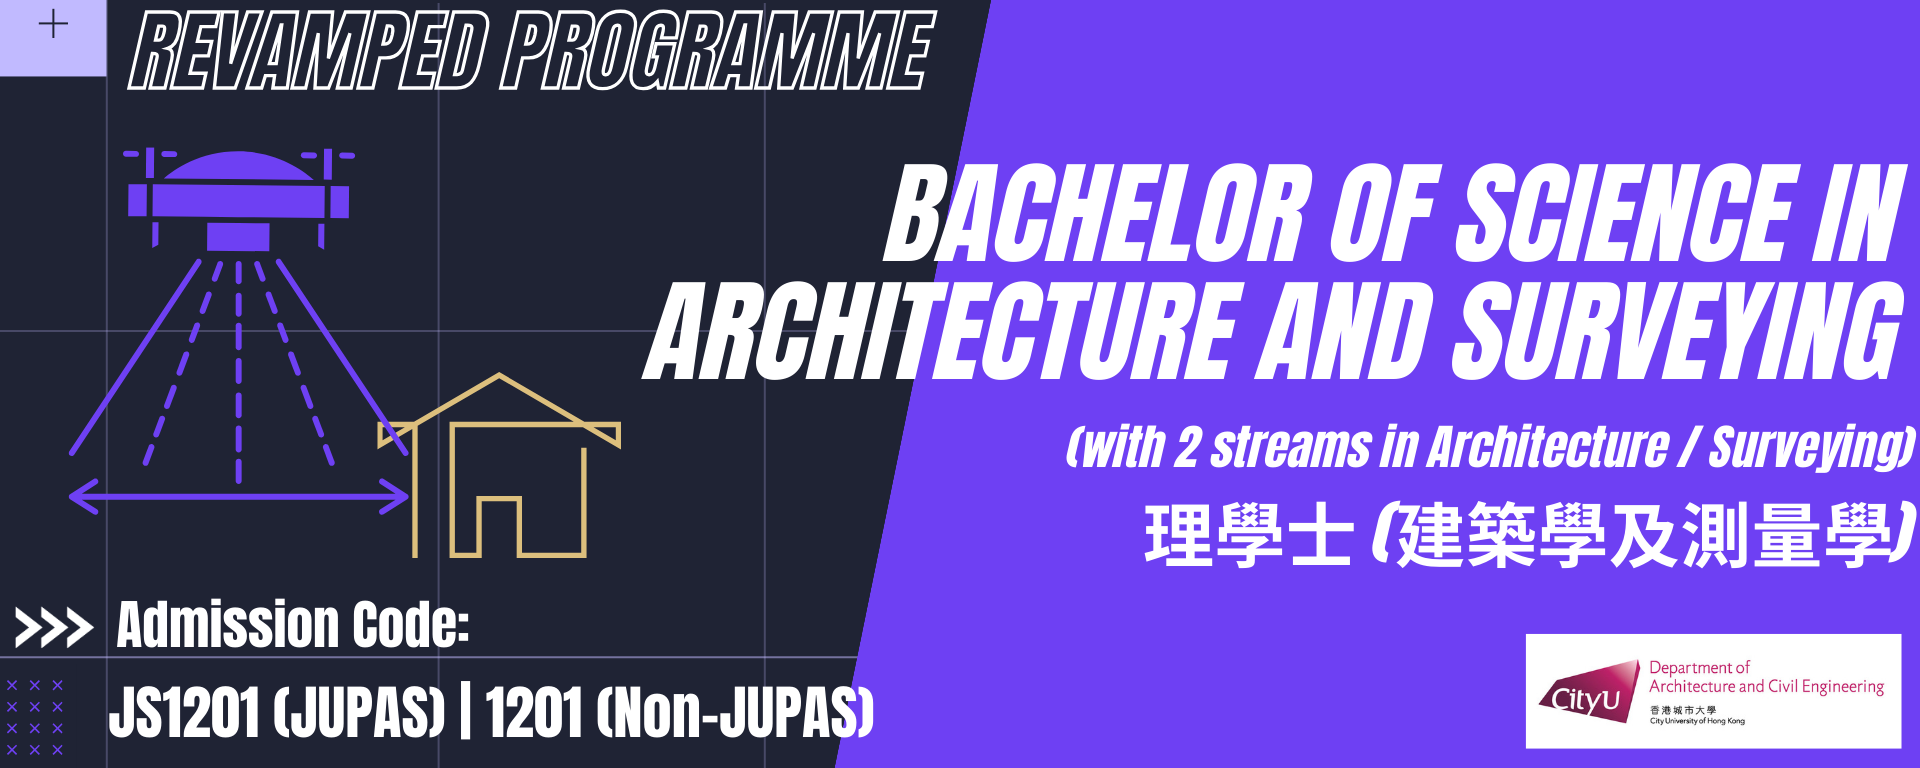 Bachelor of Science in Architecture and Surveying (with 2 streams in Architecture / Surveying)”